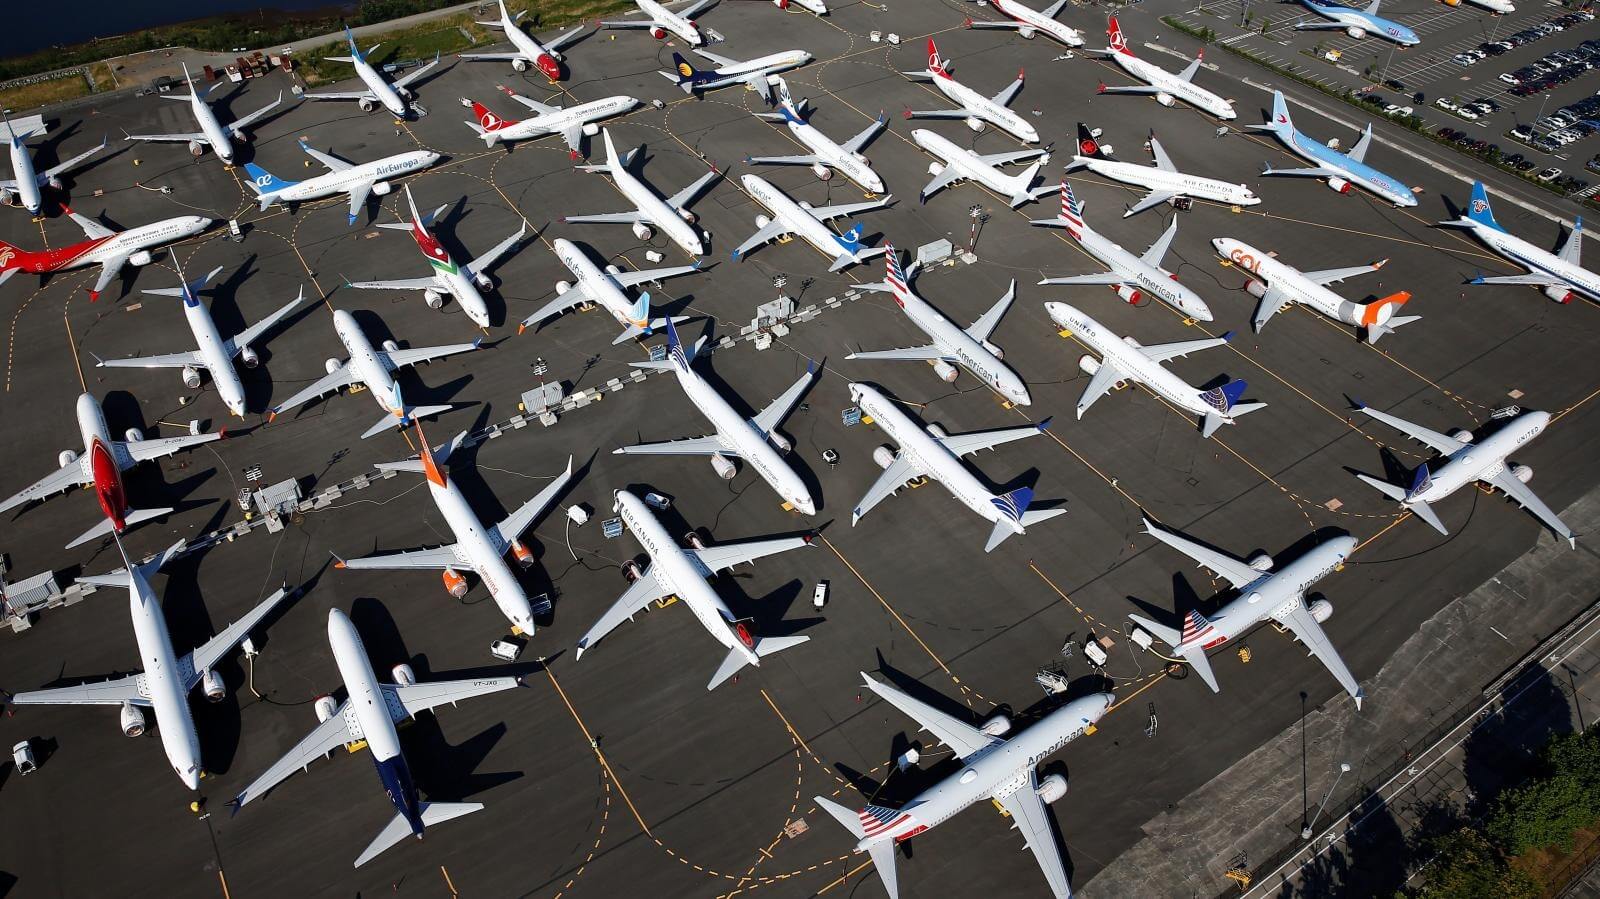 Over 50 Boeing passenger jets grounded worldwide due to ‘wing-related cracks’